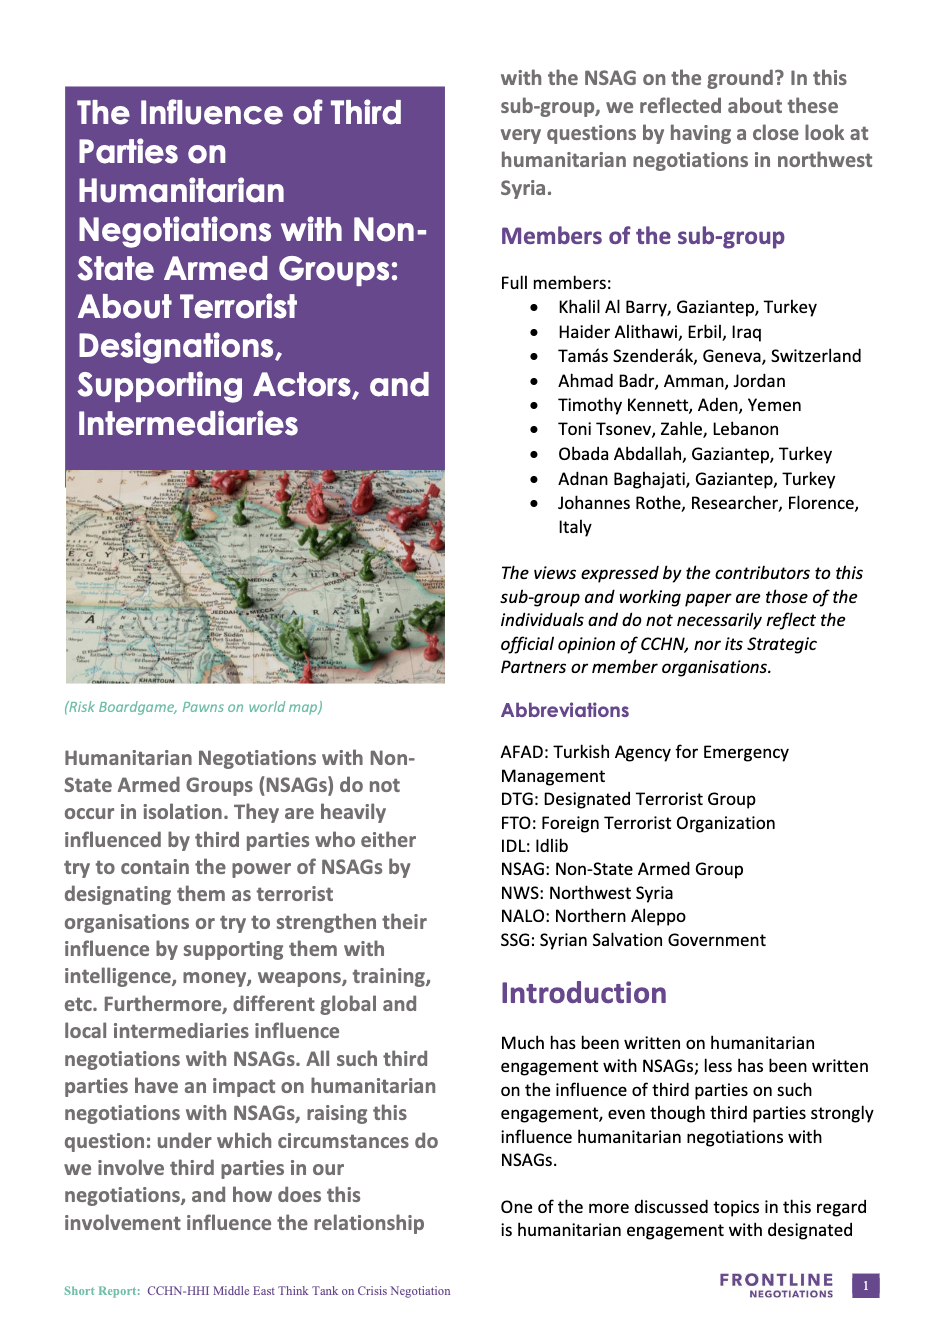 Middle East Think Tank short report on the influence of third parties in negotiations with non-state armed groups